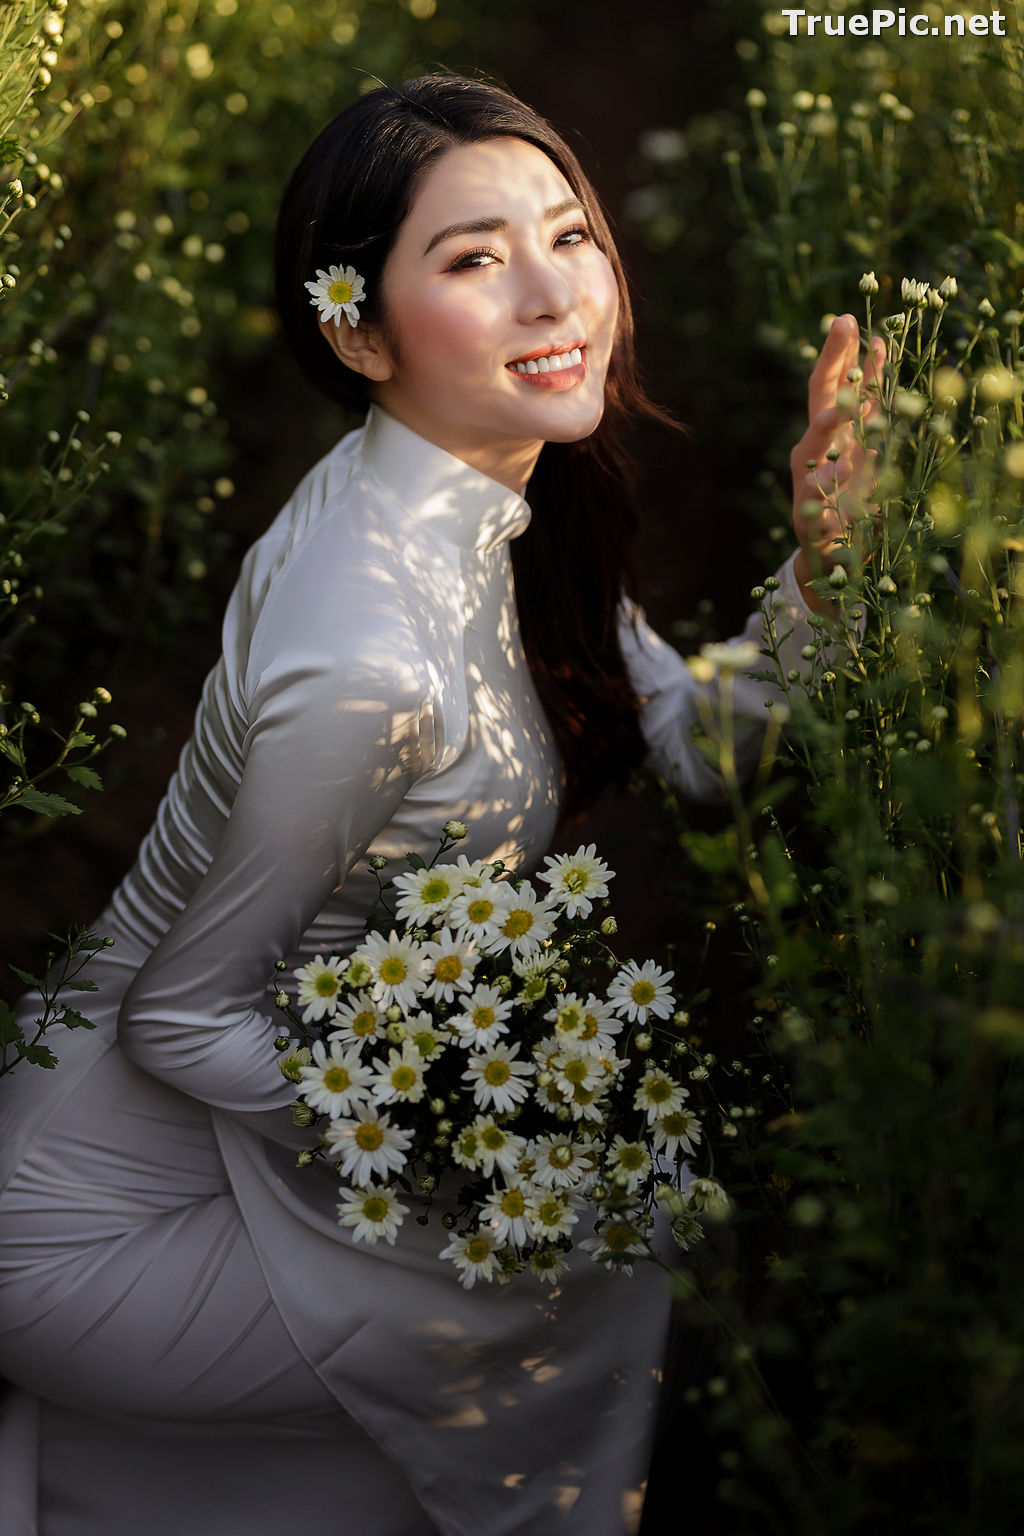 Image The Beauty of Vietnamese Girls with Traditional Dress (Ao Dai) #5 - TruePic.net - Picture-19